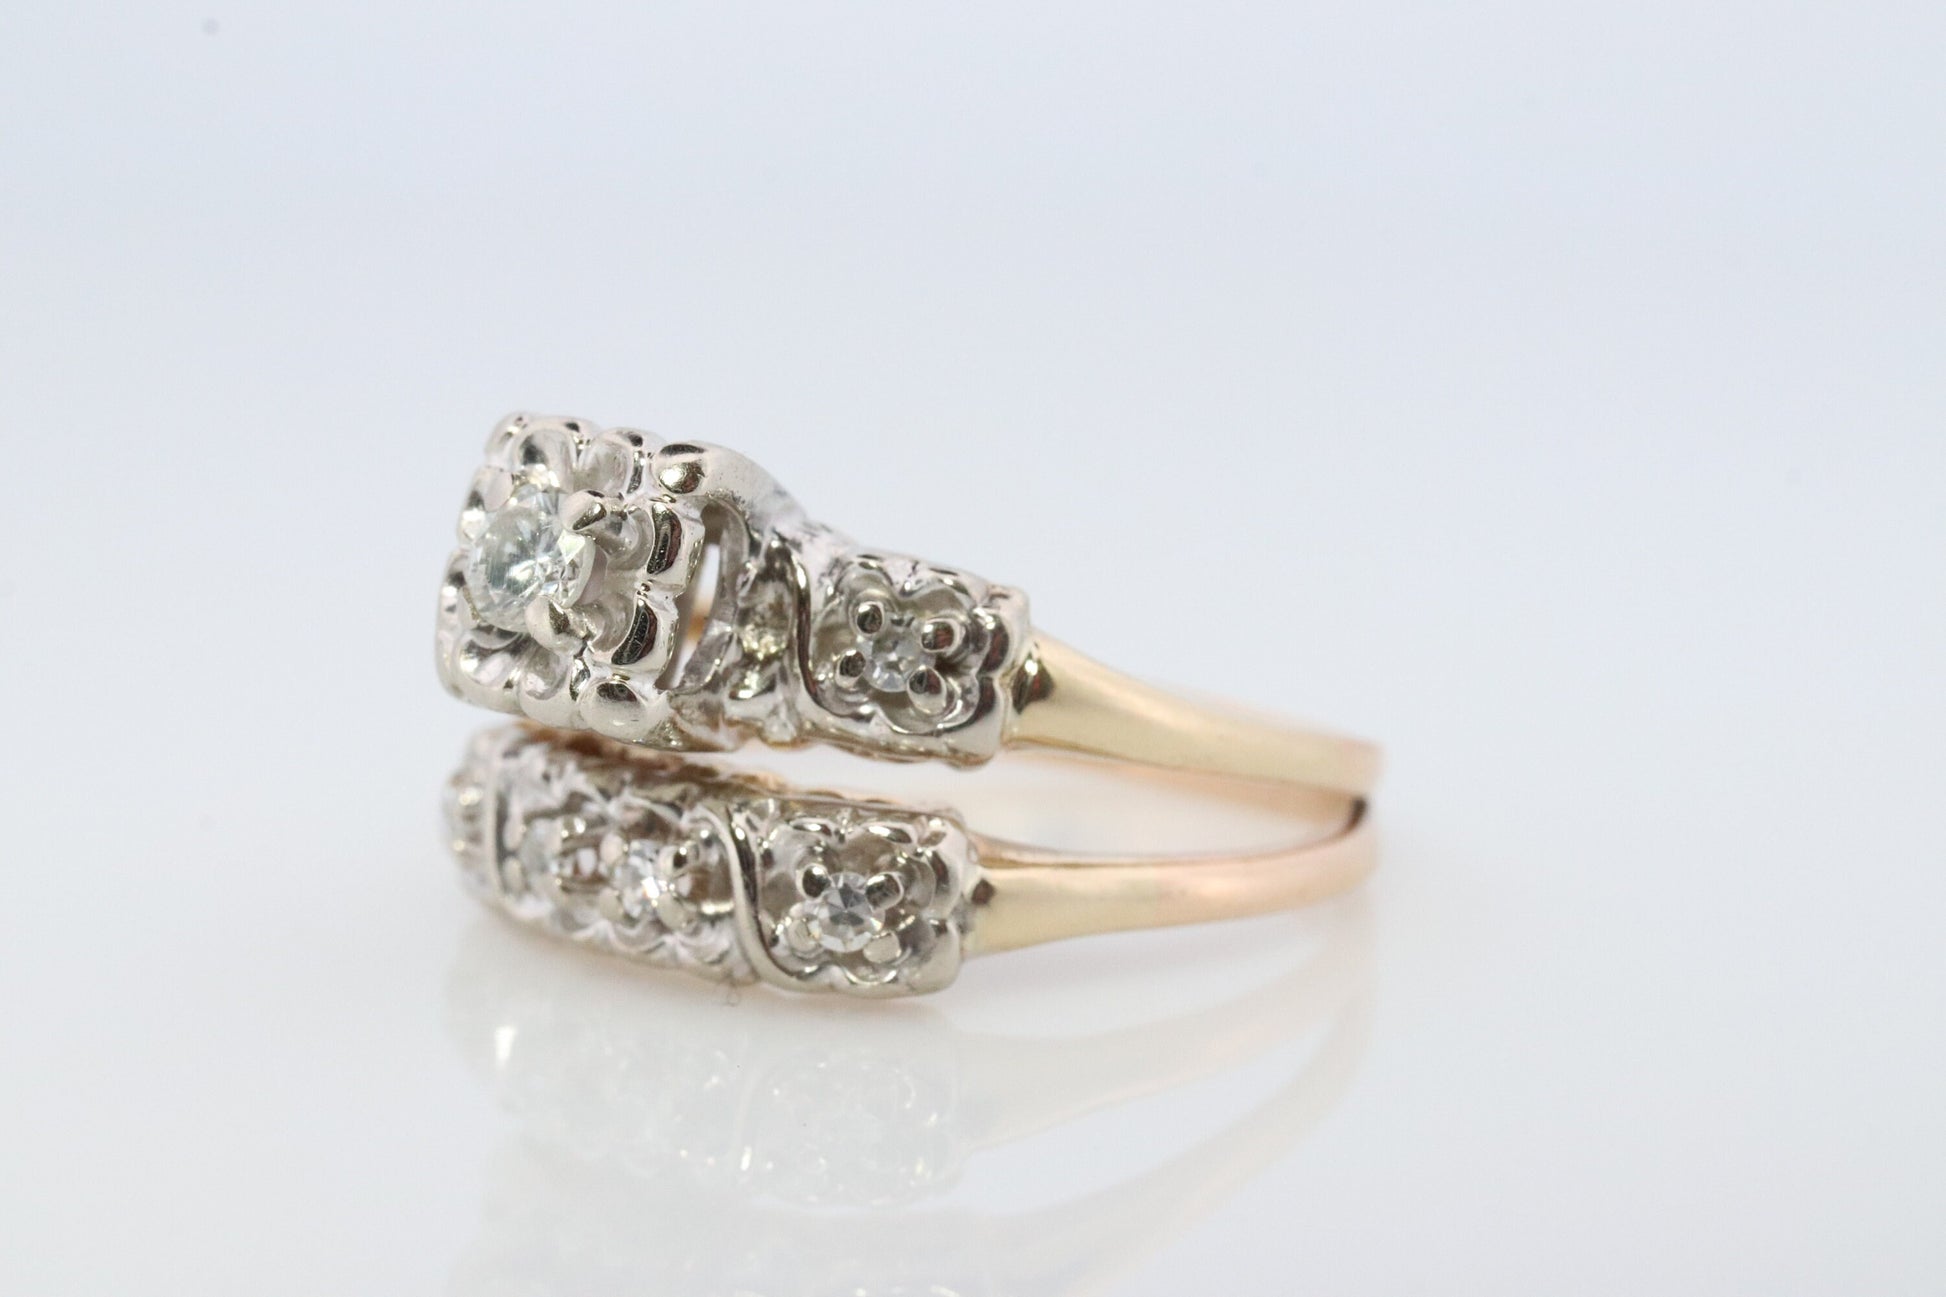 Vintage Art Deco Engagement Ring Set. 1950s. 14k Yellow and White Gold Diamond Wedding and Engagement Ring Set.